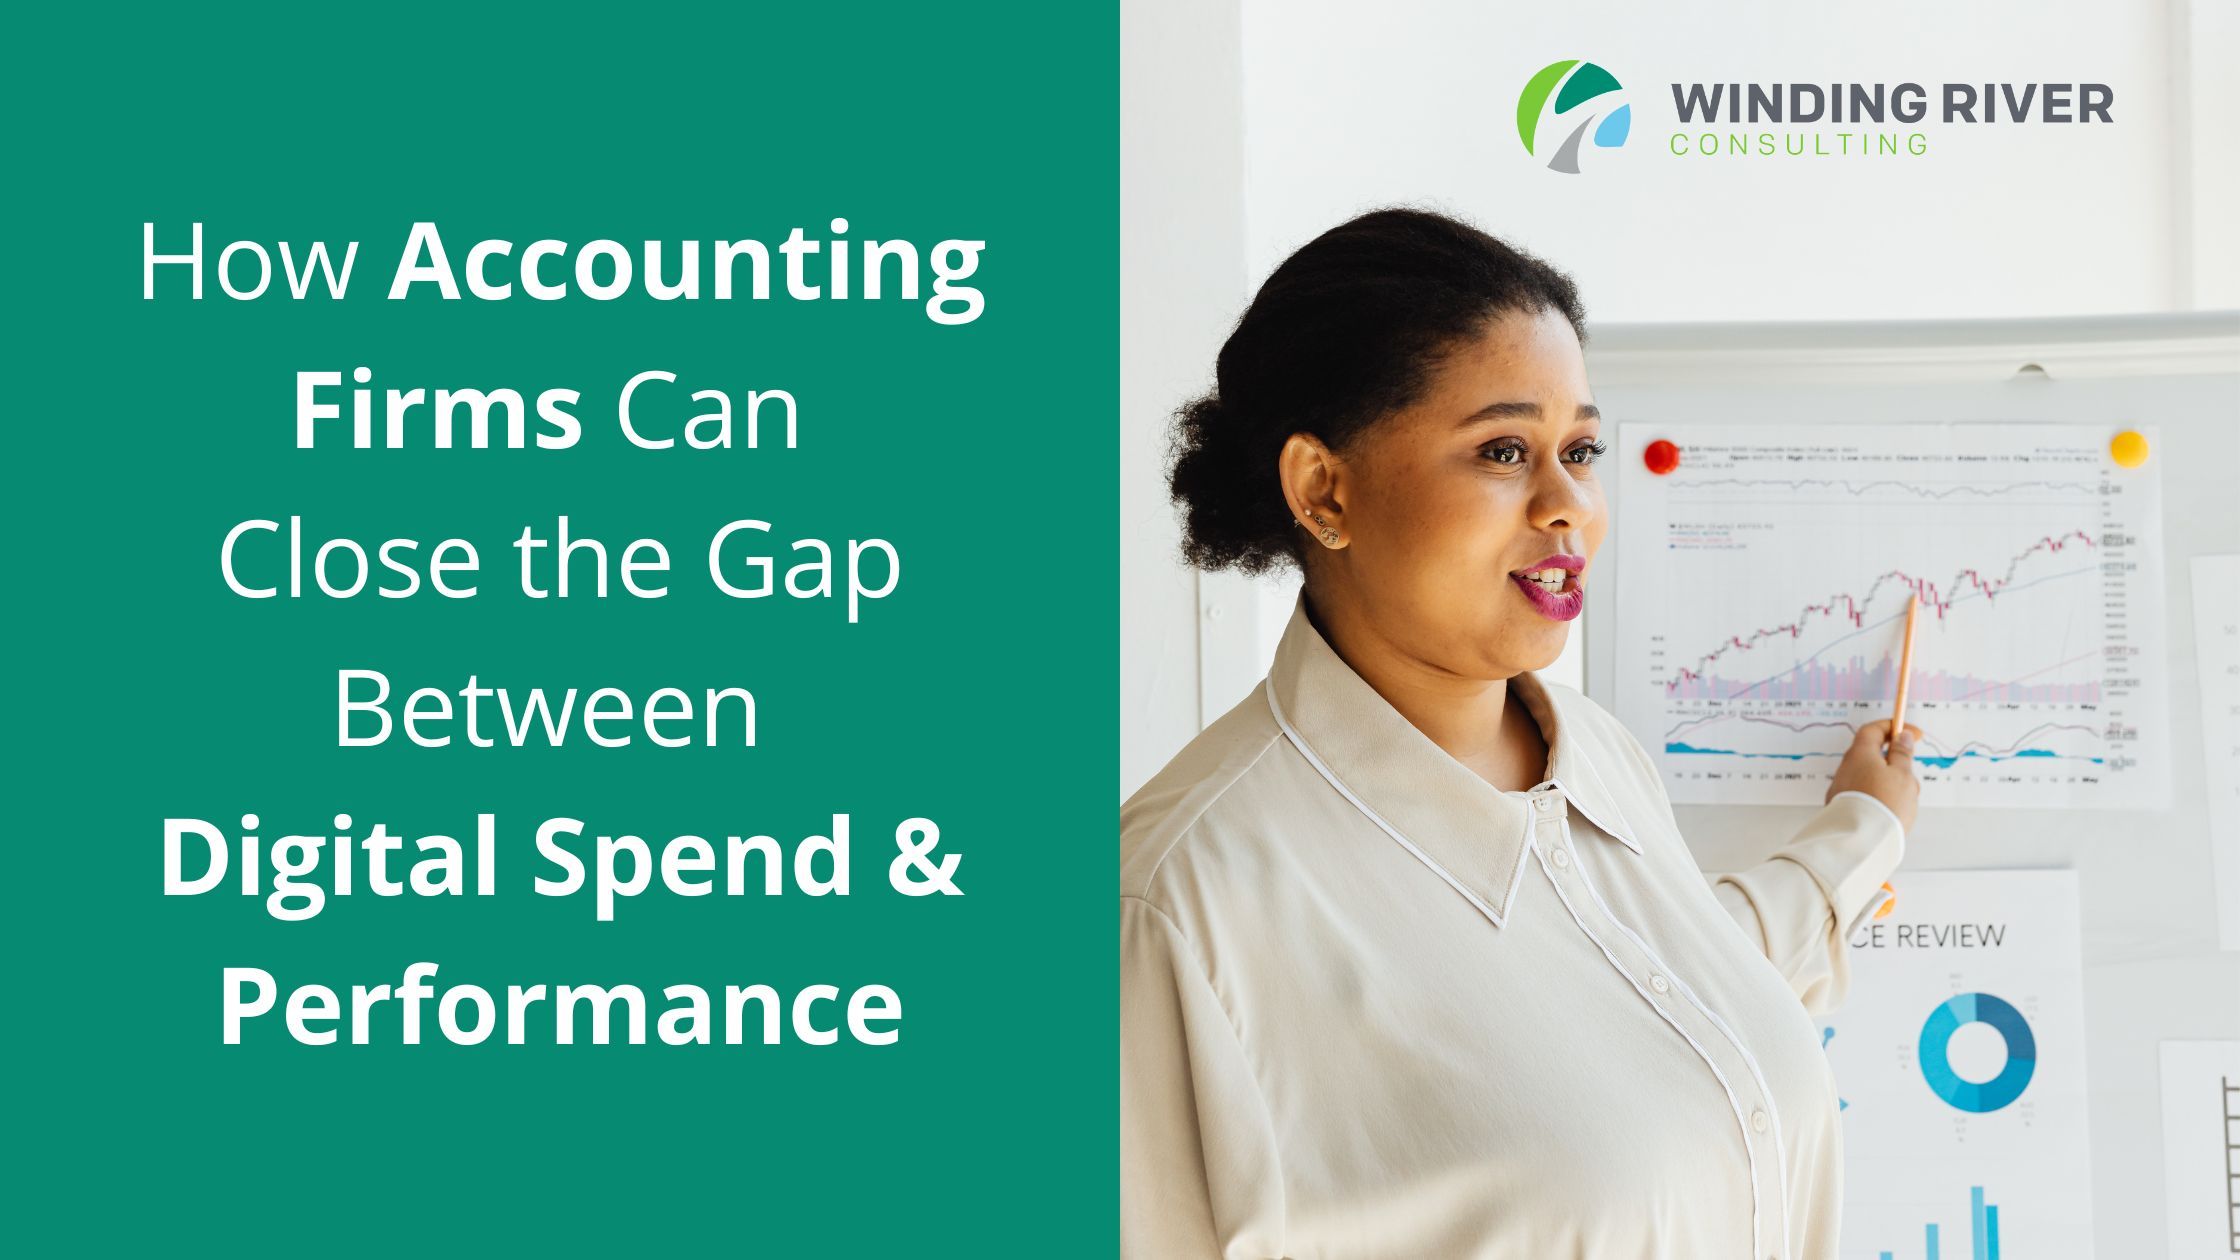 How Accounting Firms Can Close the Gap Between Digital Spend & Performance